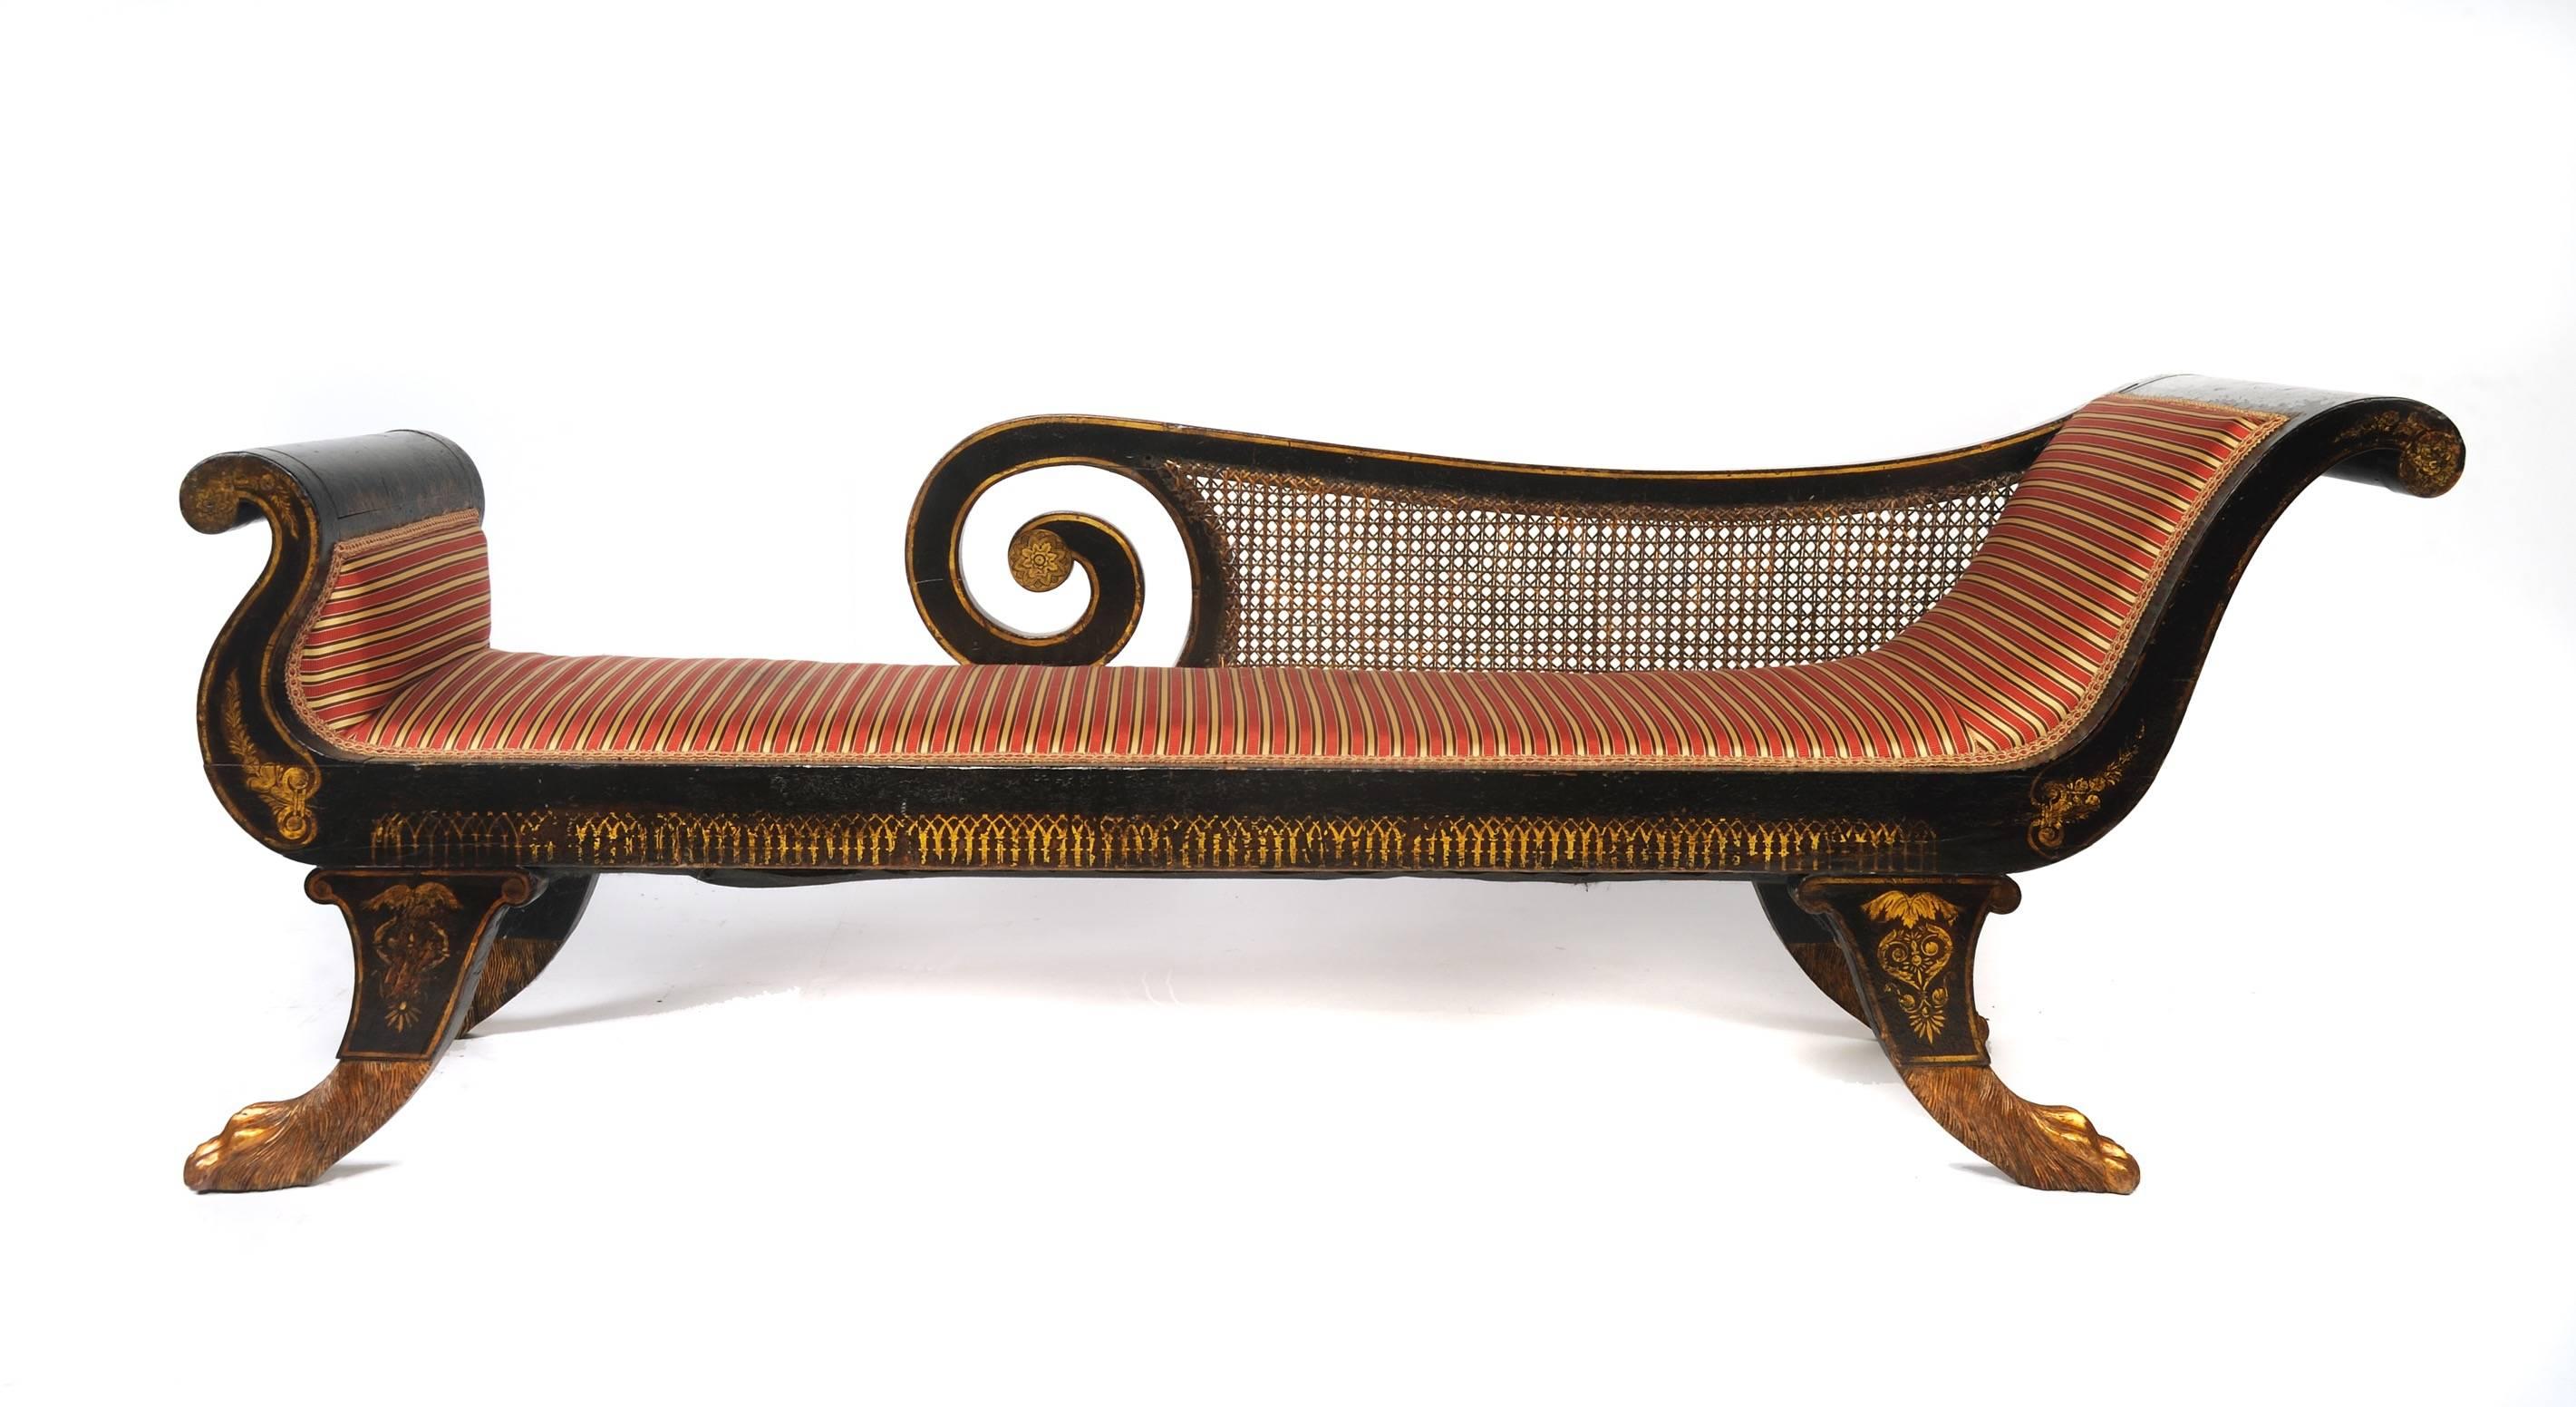 Classical Grecian Style, Caned, Painted and Gilt Stenciled Recamier, Pennsylvania Federal, c. 1820-30.  The remaining paint and stenciling as well as the ornately carved lion's paw feet are highly accomplished.  The entirety of this recaimer is made